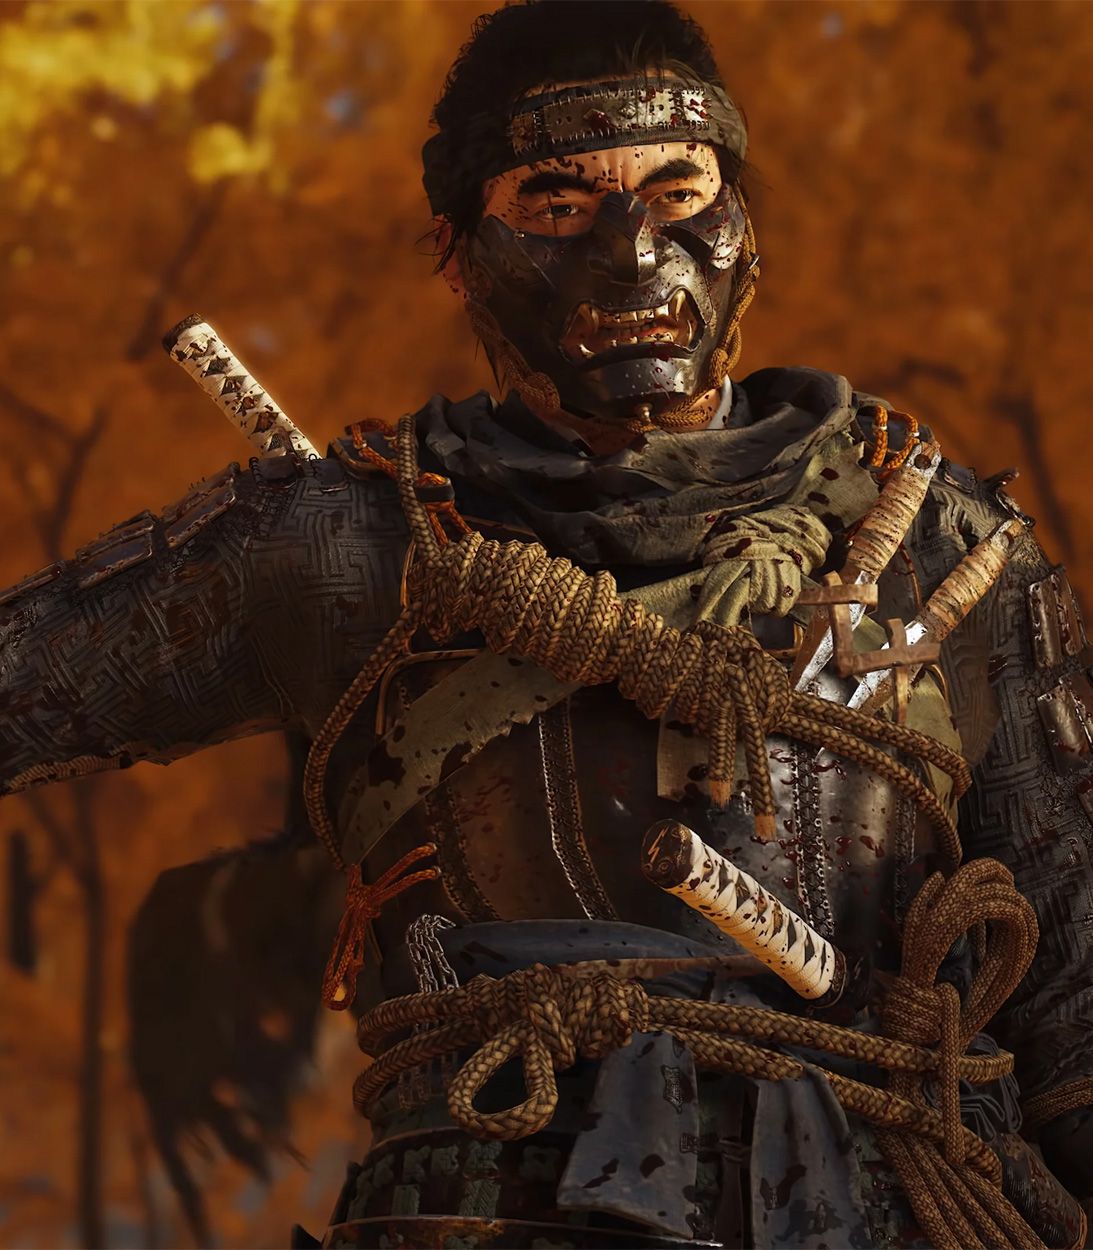 TLDR Ghost of Tsushima Covered in Blood